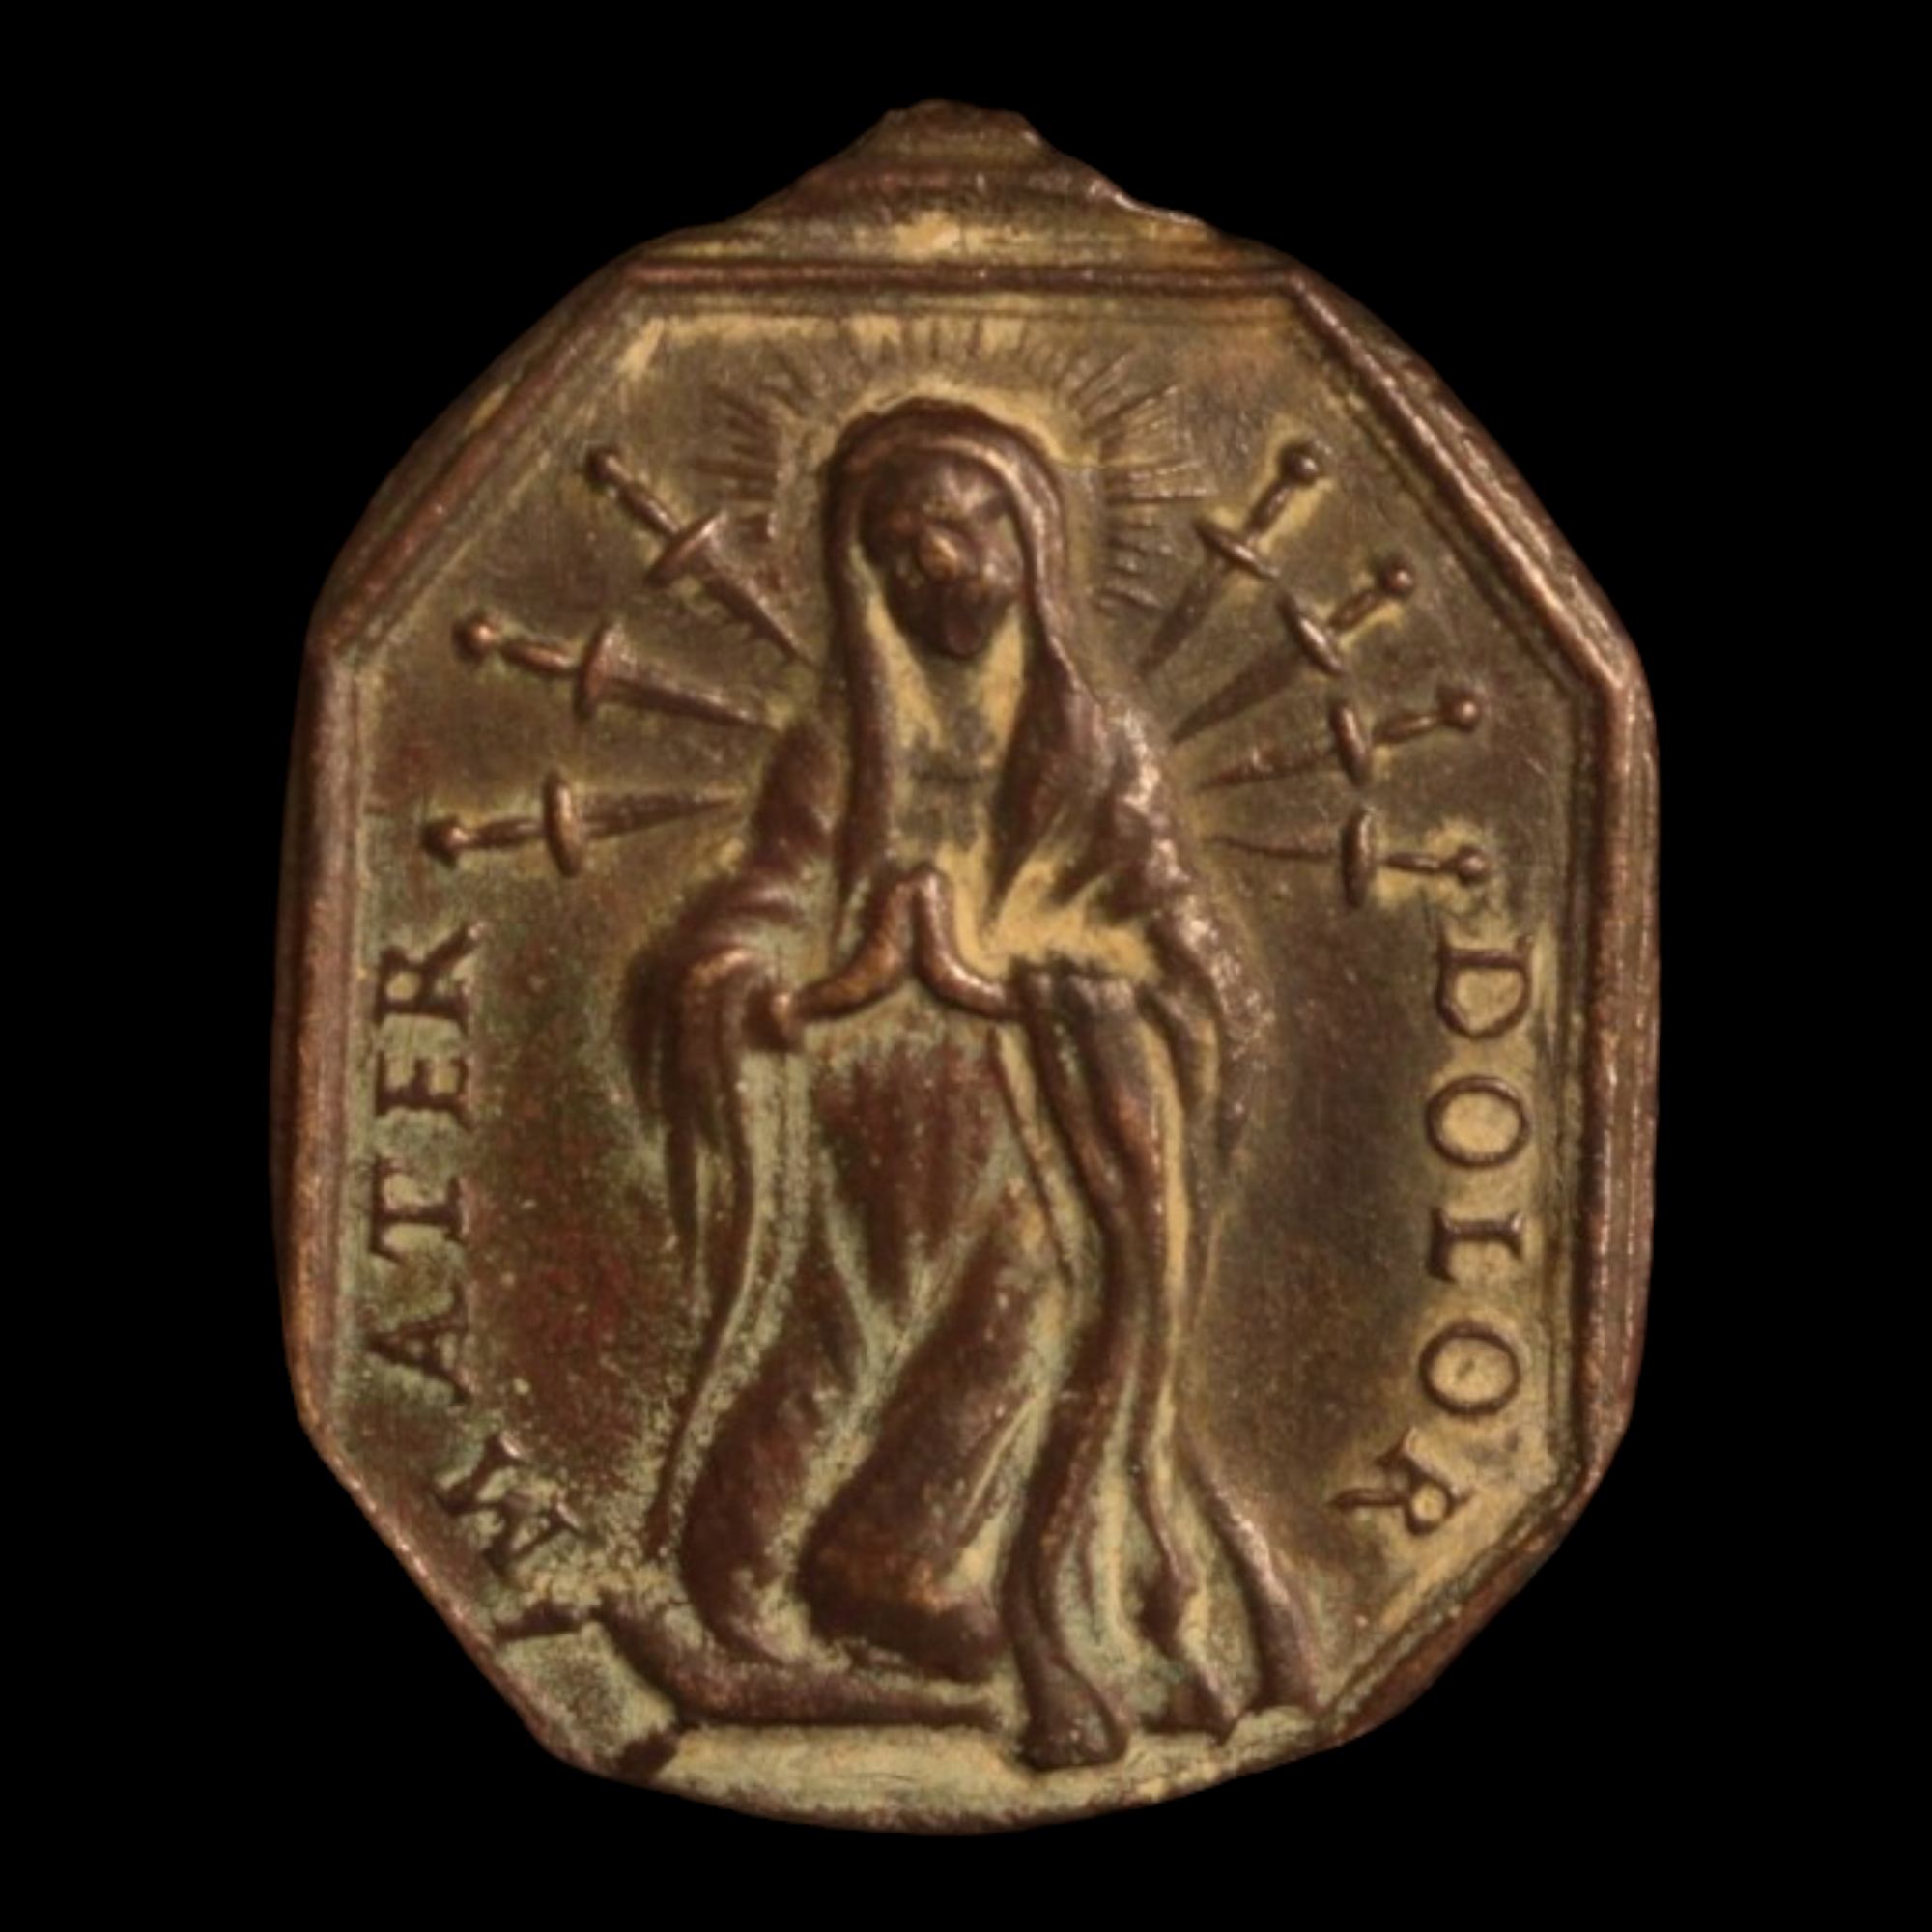 Religious Medal, Catholic Church, St. Francis & Grieving Virgin Mary, 22mm - 1500s to 1700s - Spanish Empire